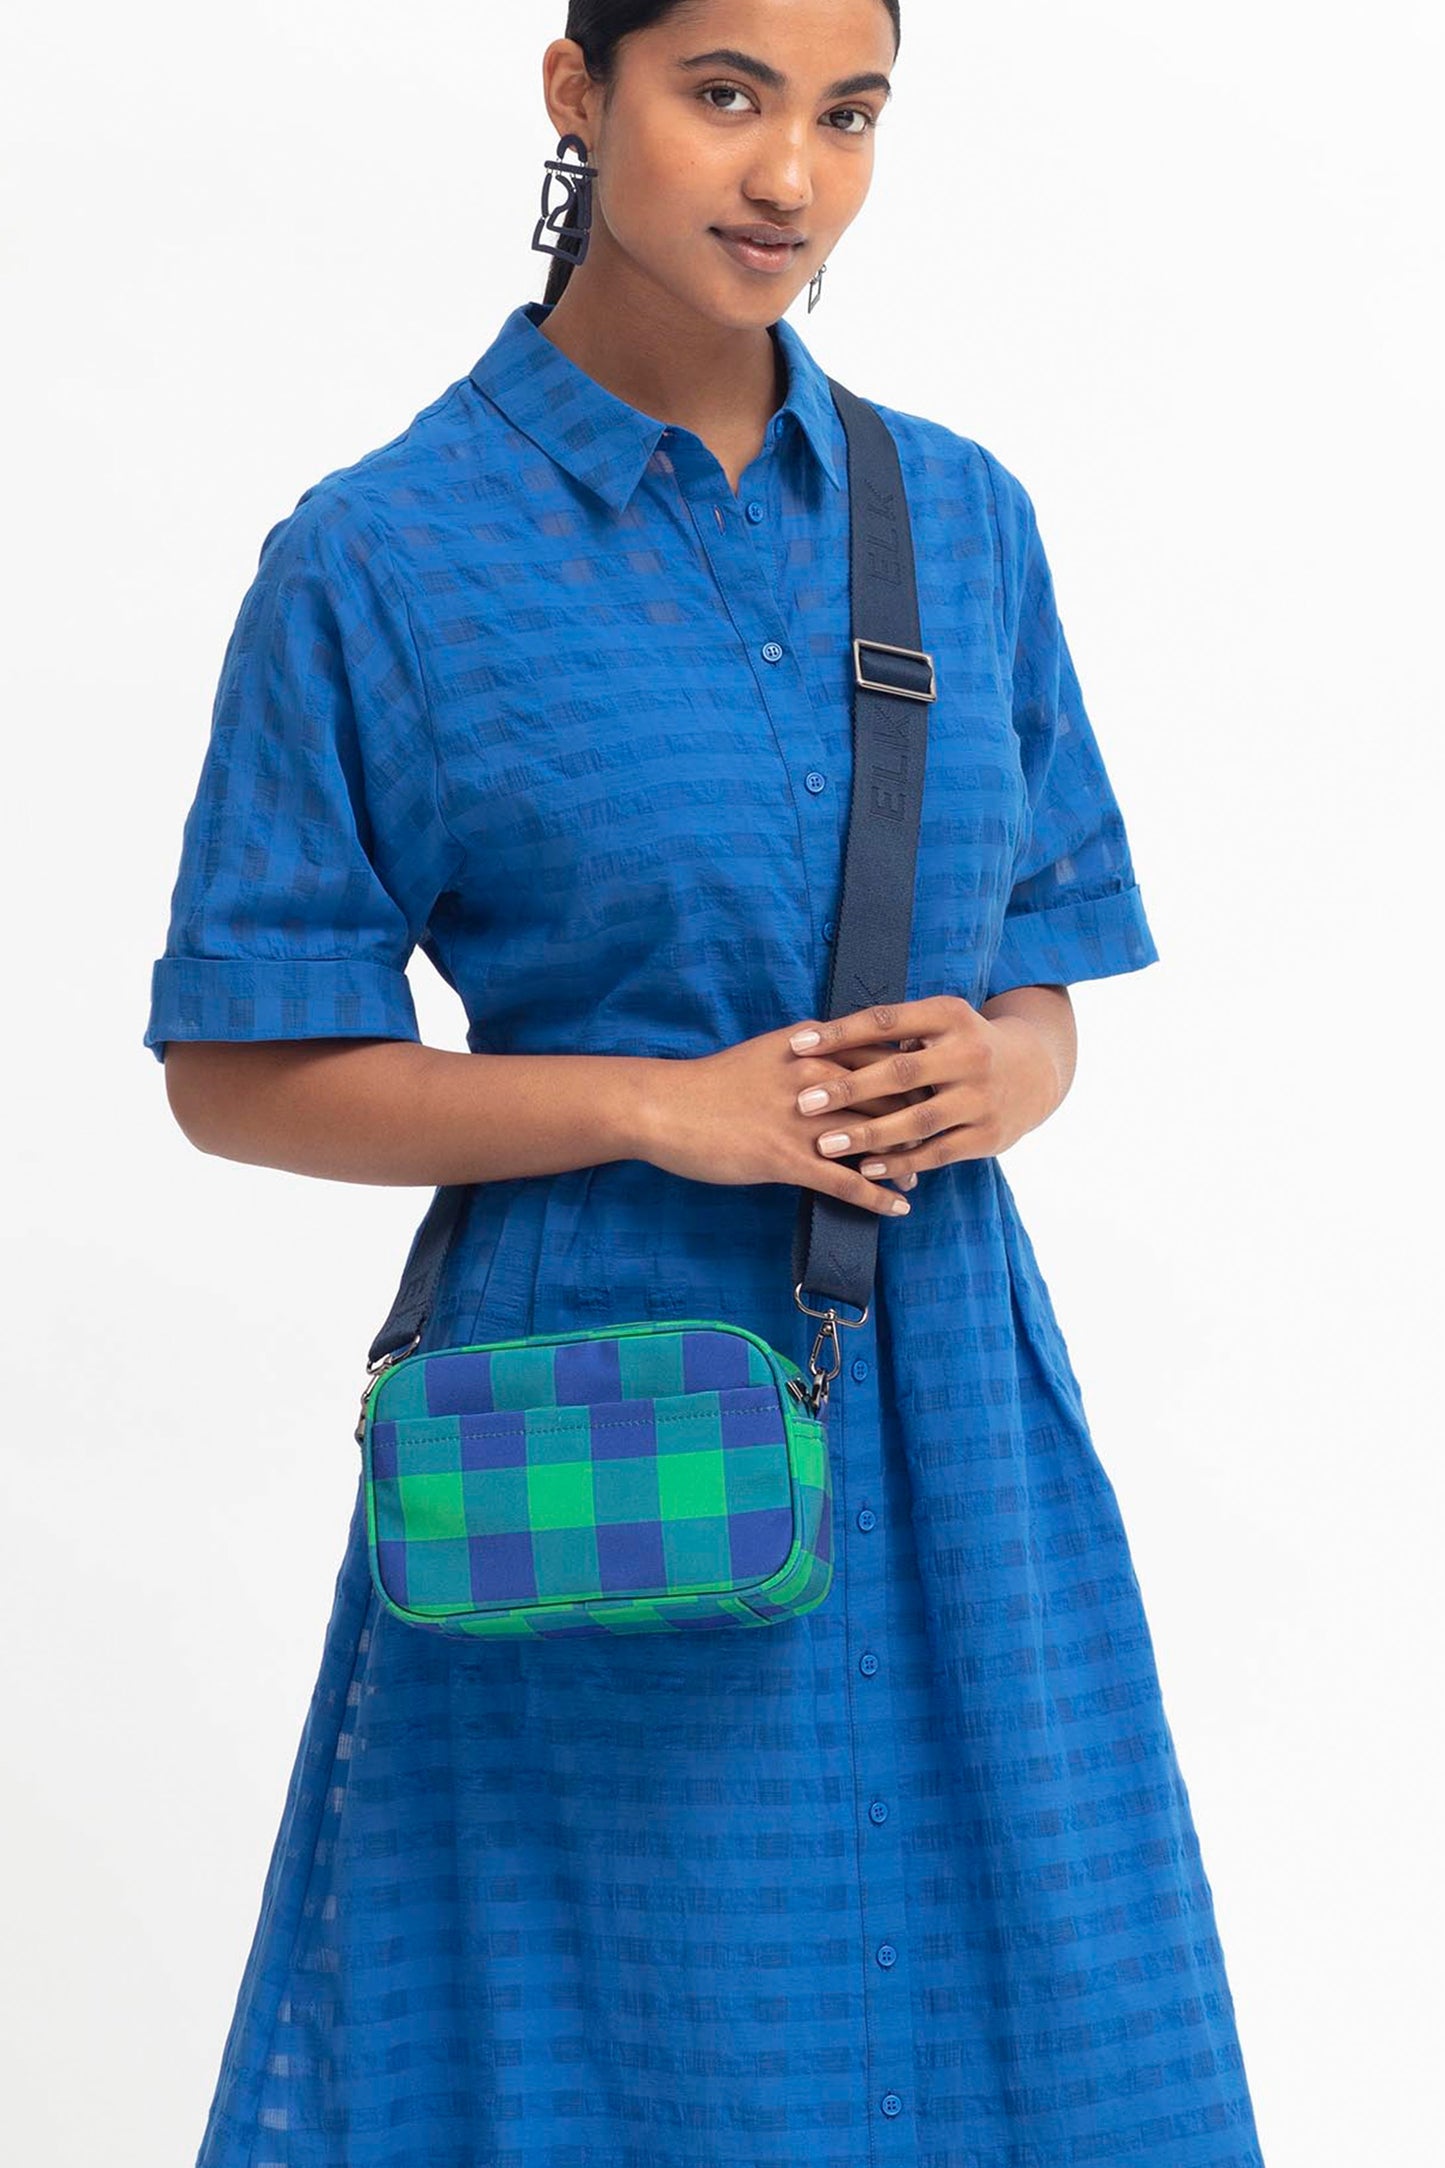 Kassel Recycled Fabric Gingham Print Zip Up Cross Body Bag Model Back | ELECTRIC BLUE GREEN GINGHAM